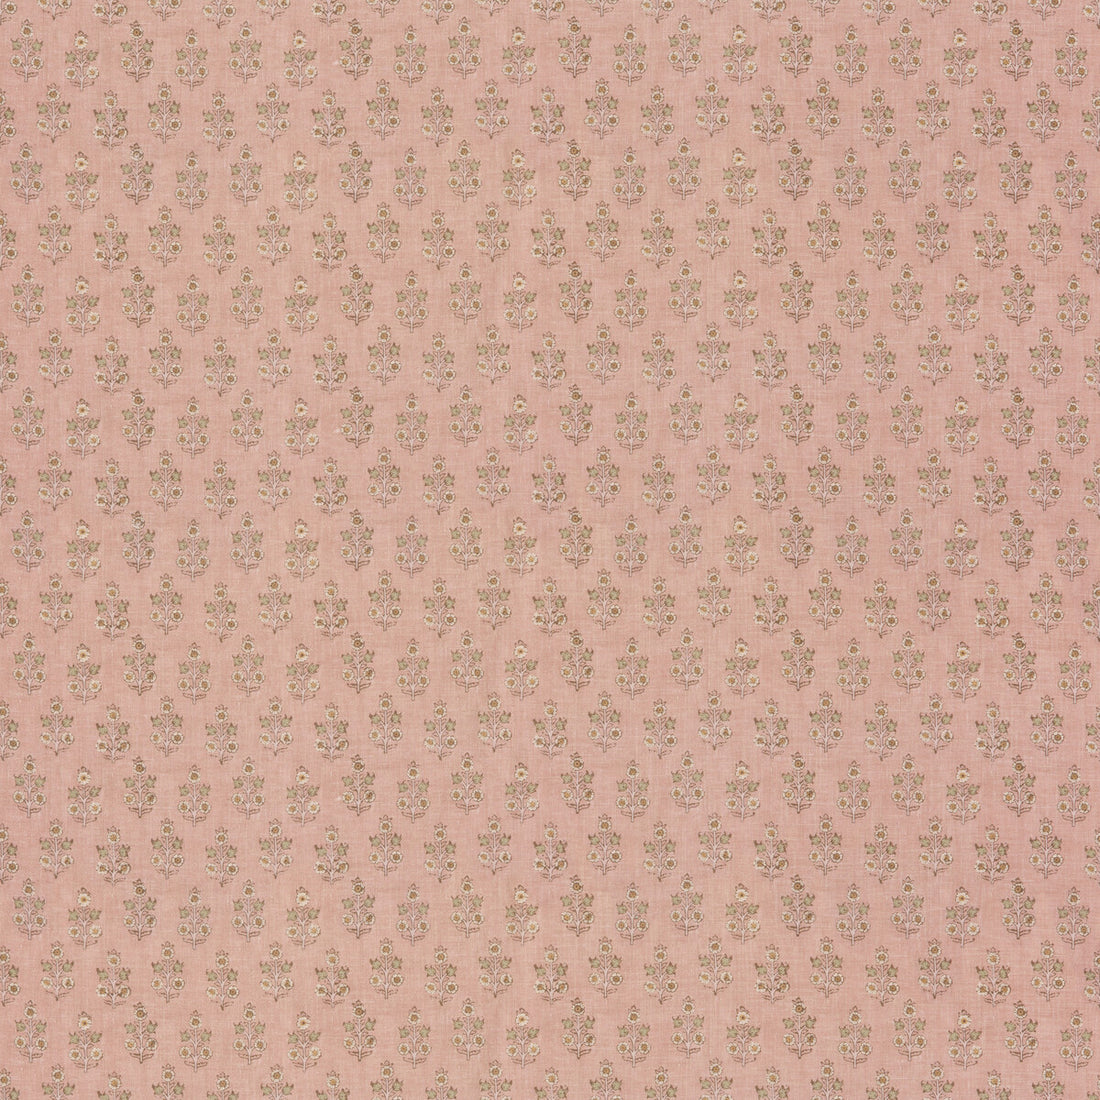 Poppy Sprig fabric in blush color - pattern BP11003.6.0 - by G P &amp; J Baker in the House Small Prints collection